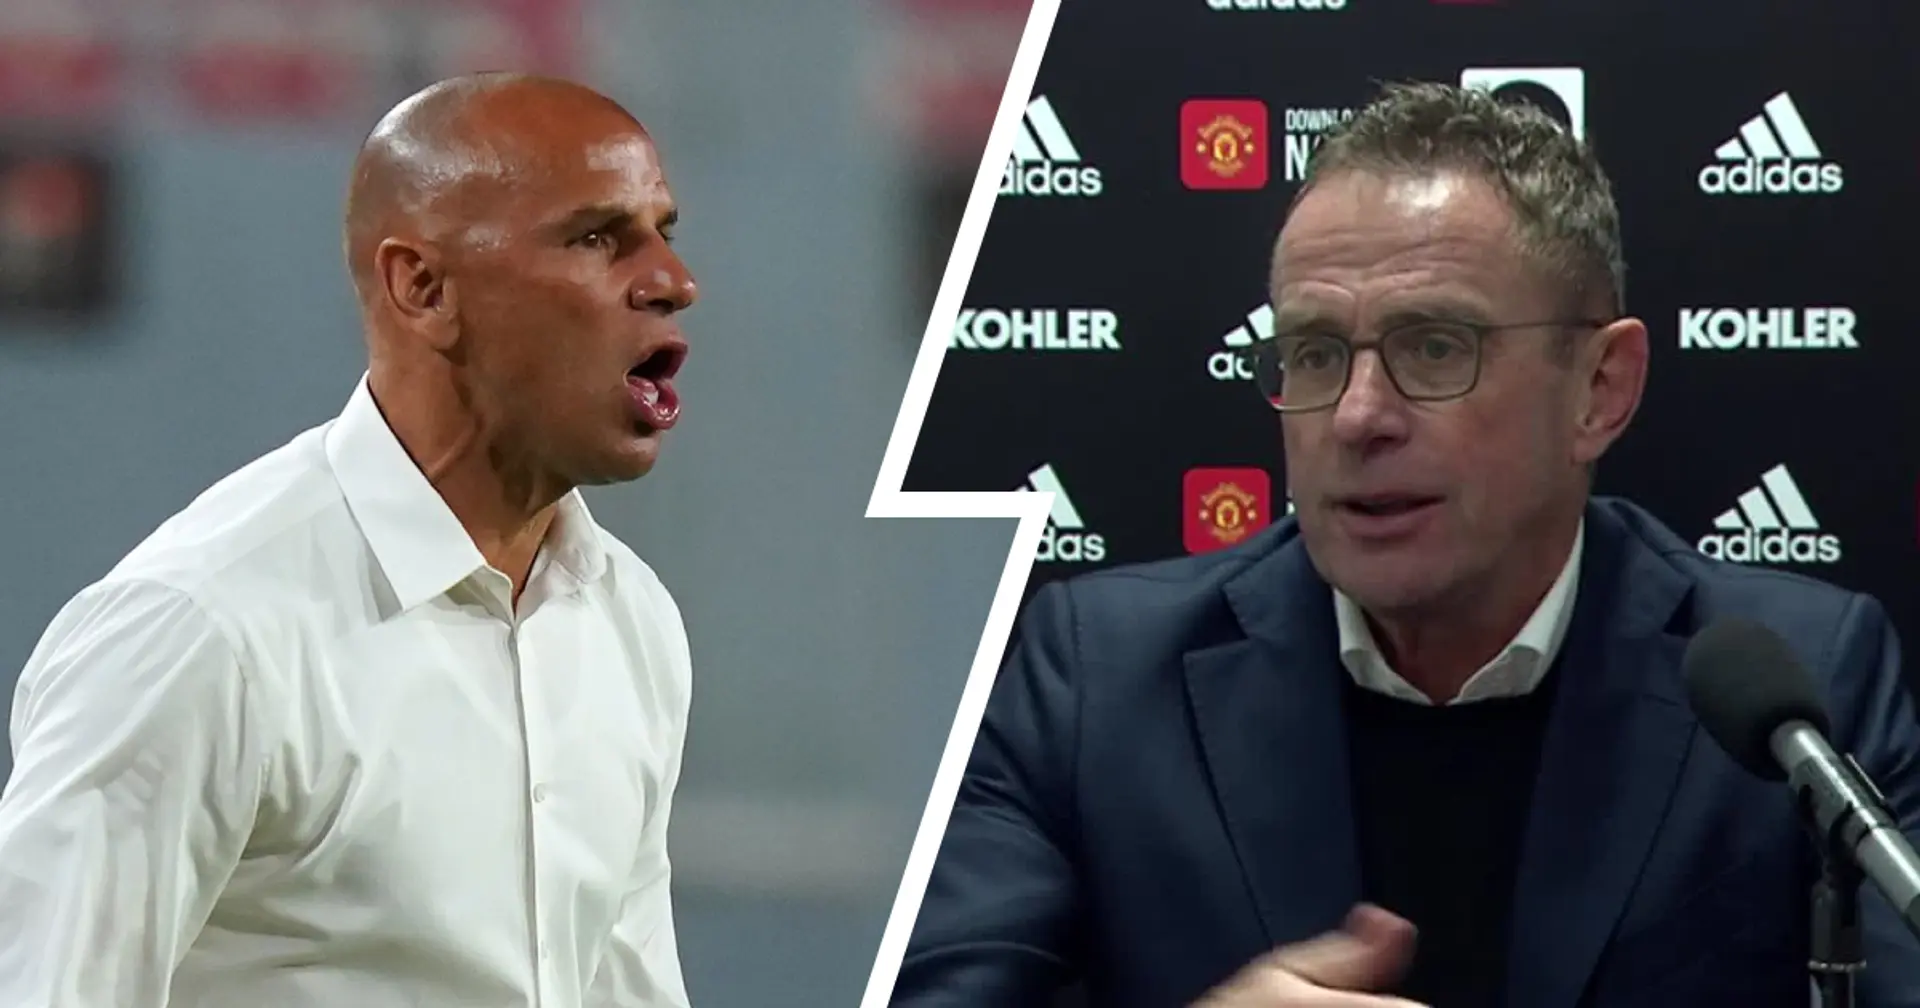 Ralf Rangnick confirms Man United's new assistant manager and sports psychologist